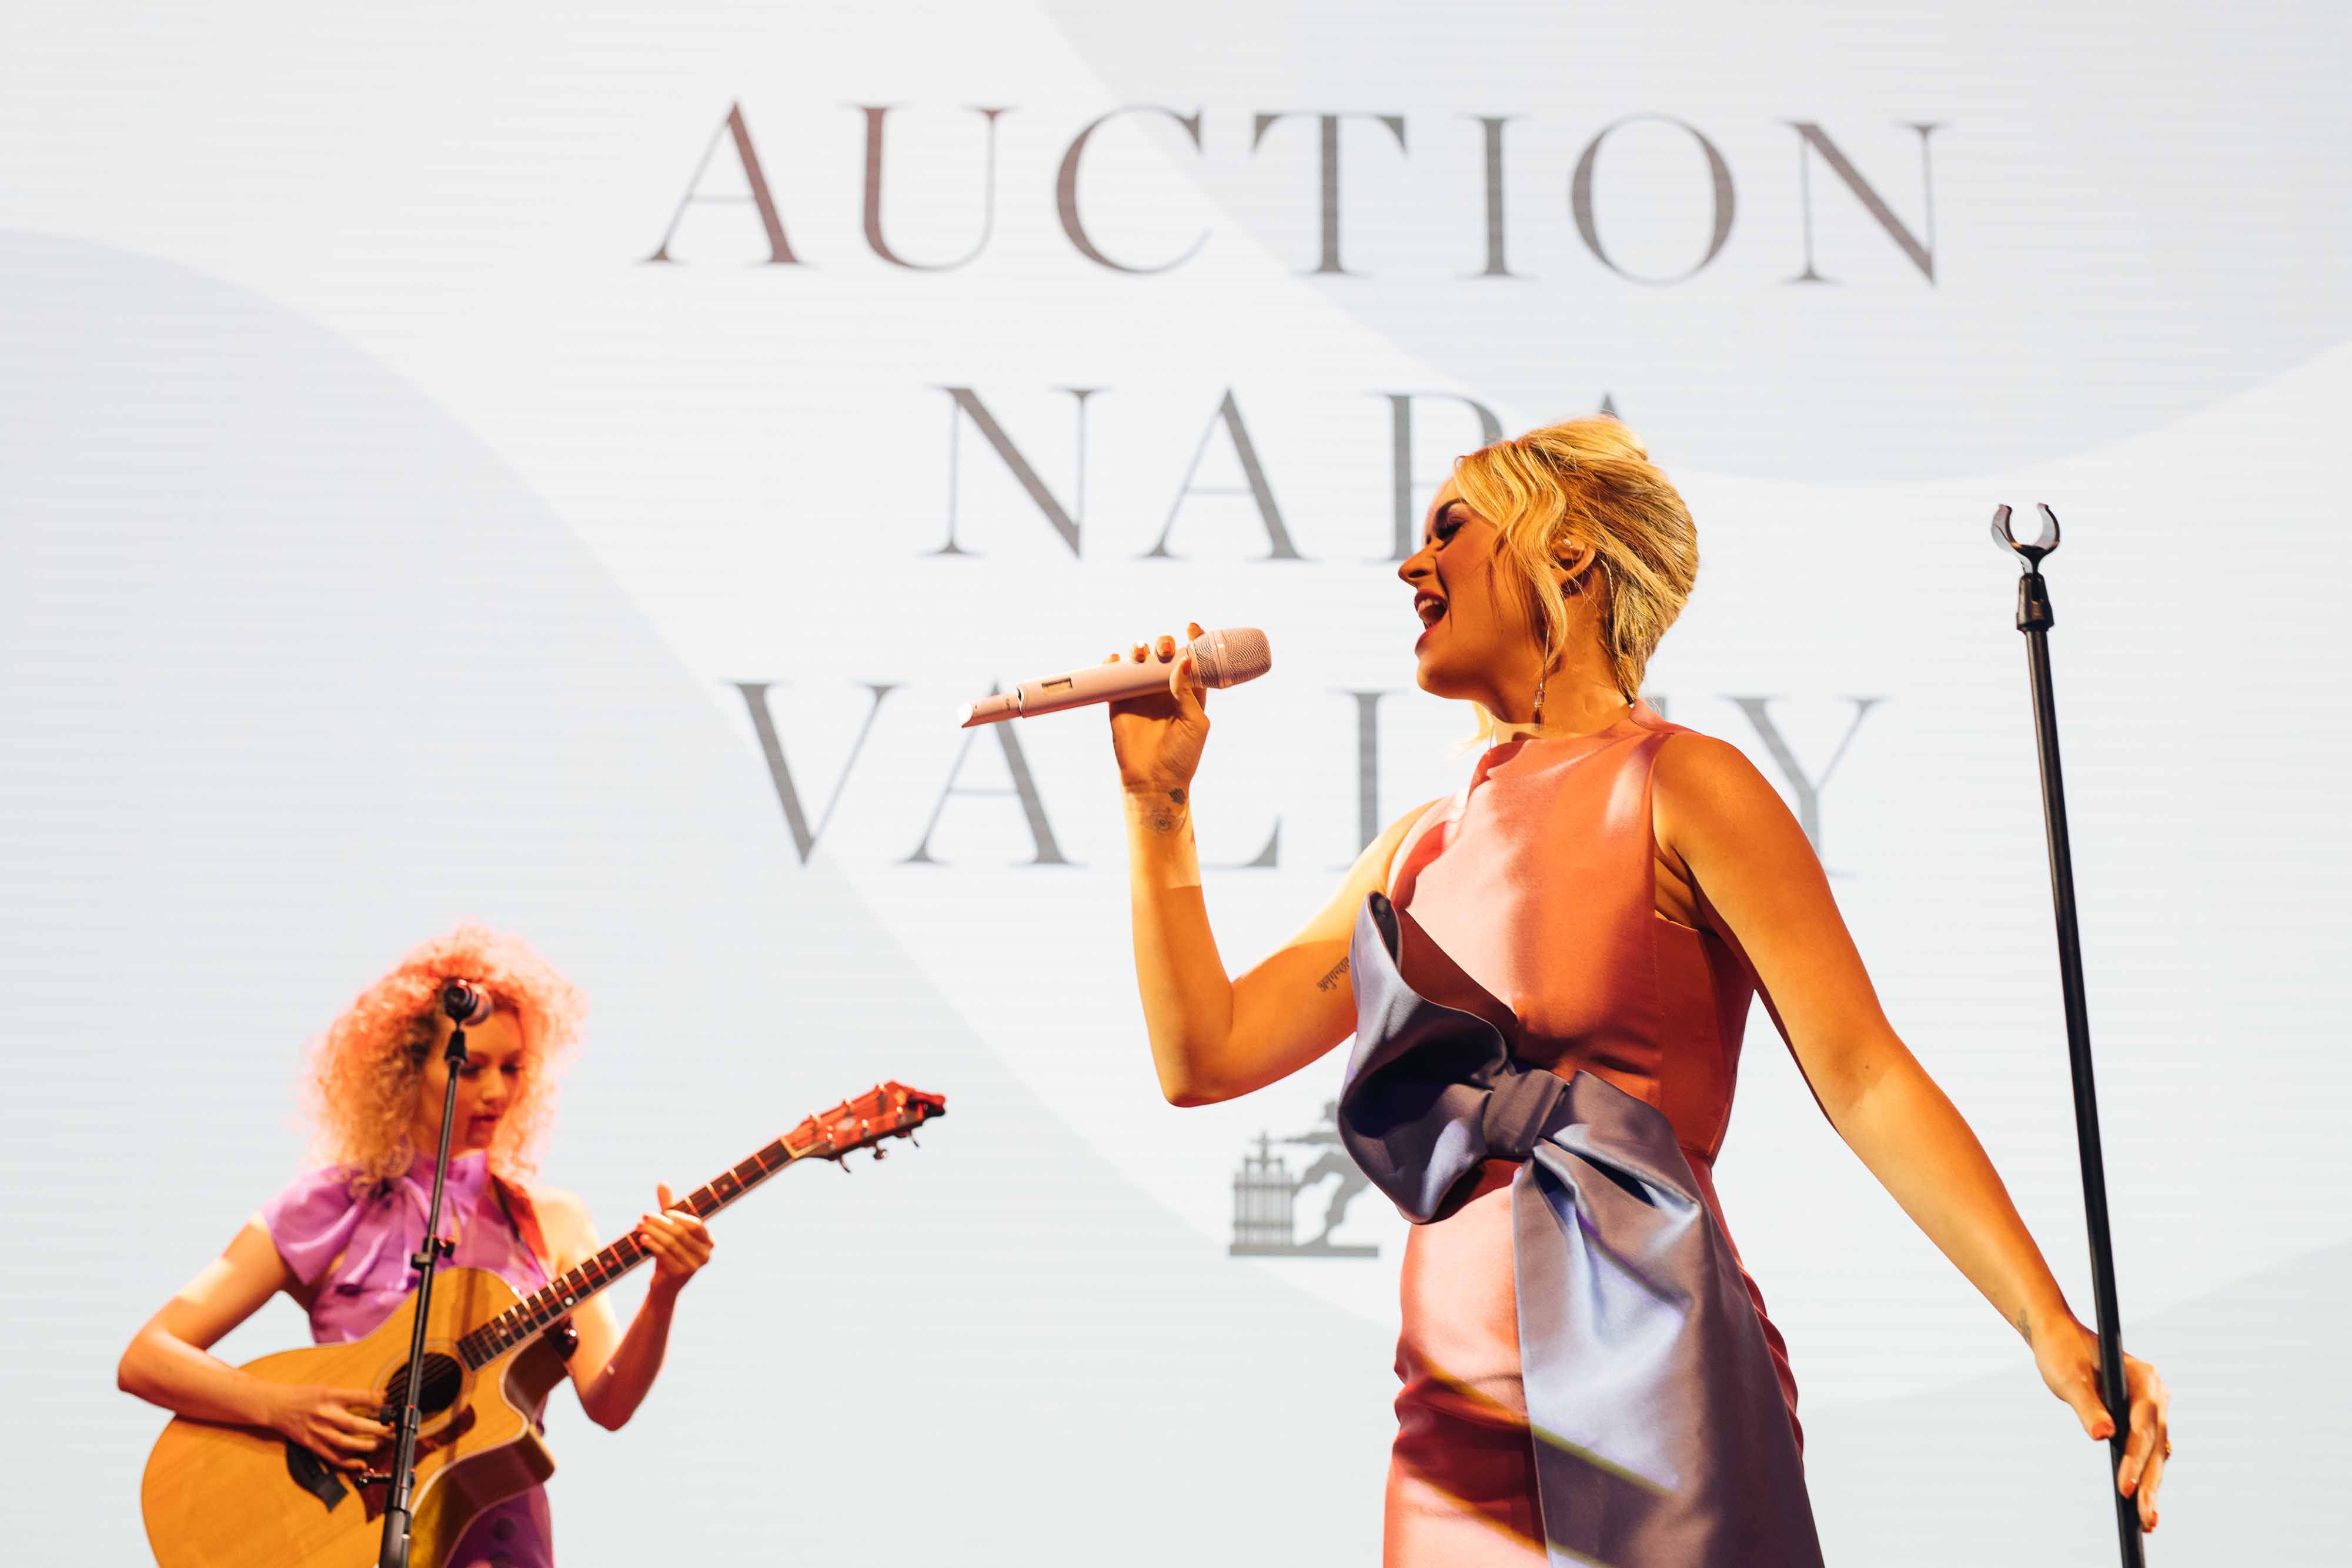 Katy Perry Performed at Auction Napa Valley, Where Bidders Paid